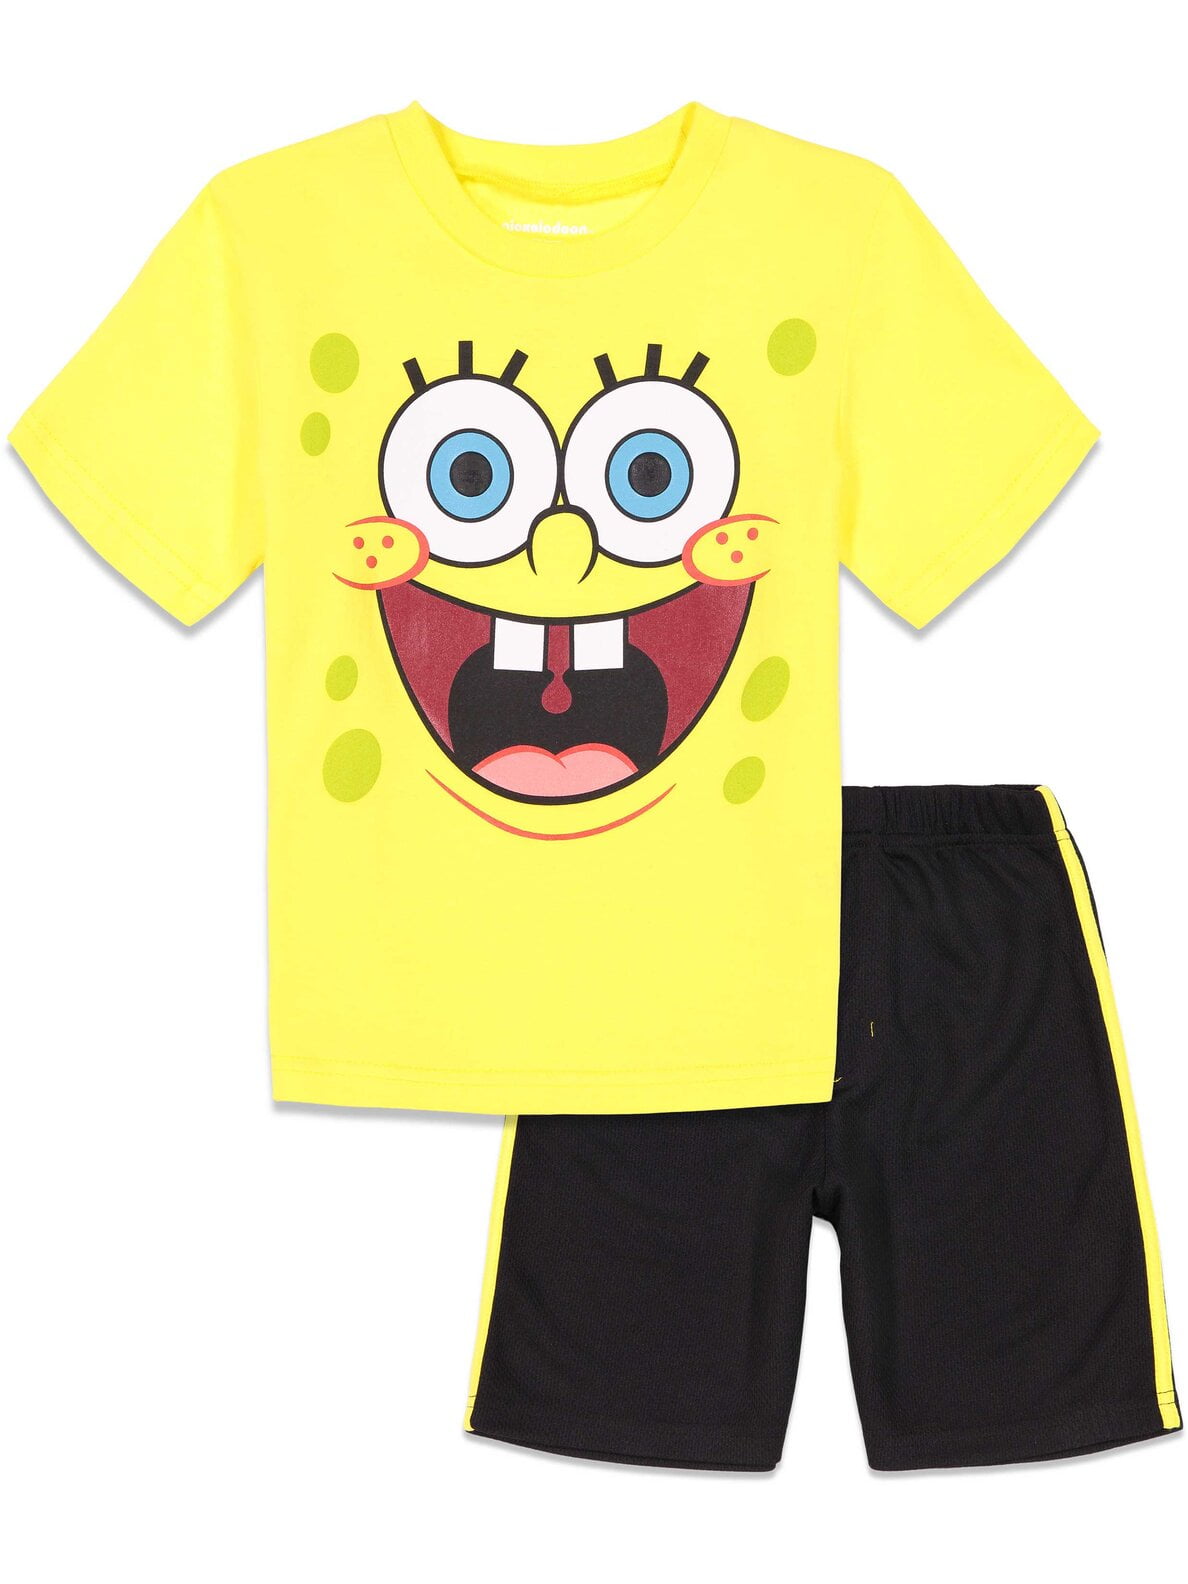 SpongeBob SquarePants Little Boys T-Shirt and Active Dolphin Mesh Shorts  Outfit Set Little Kid to Big Kid 